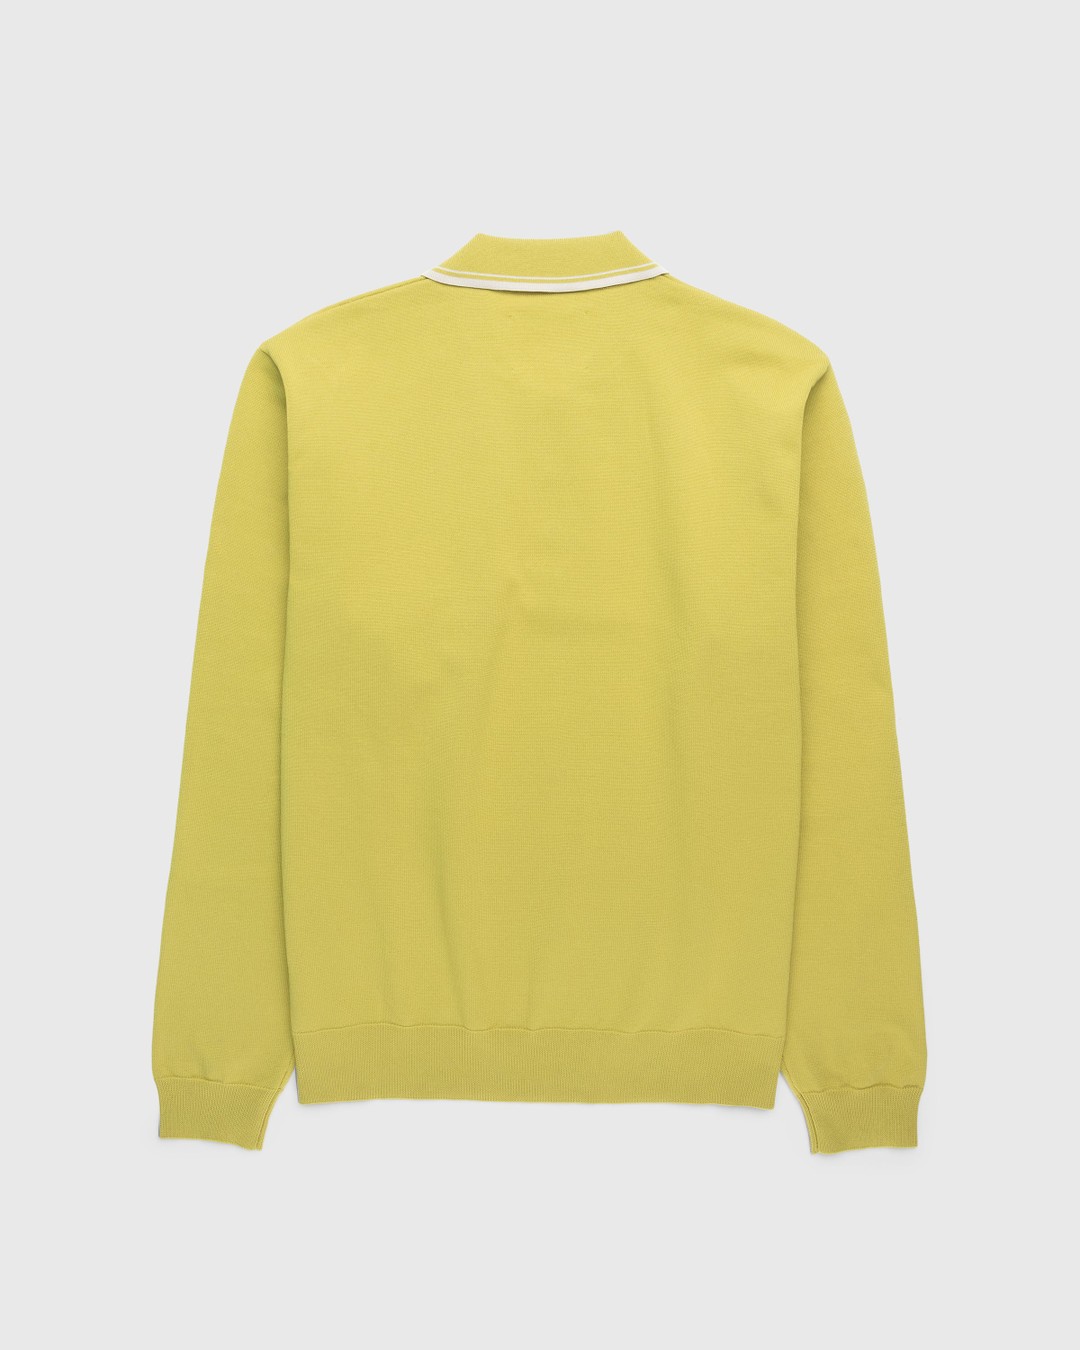 Highsnobiety HS05 – Long Sleeves Knit Polo Green - Longsleeves - Green - Image 2